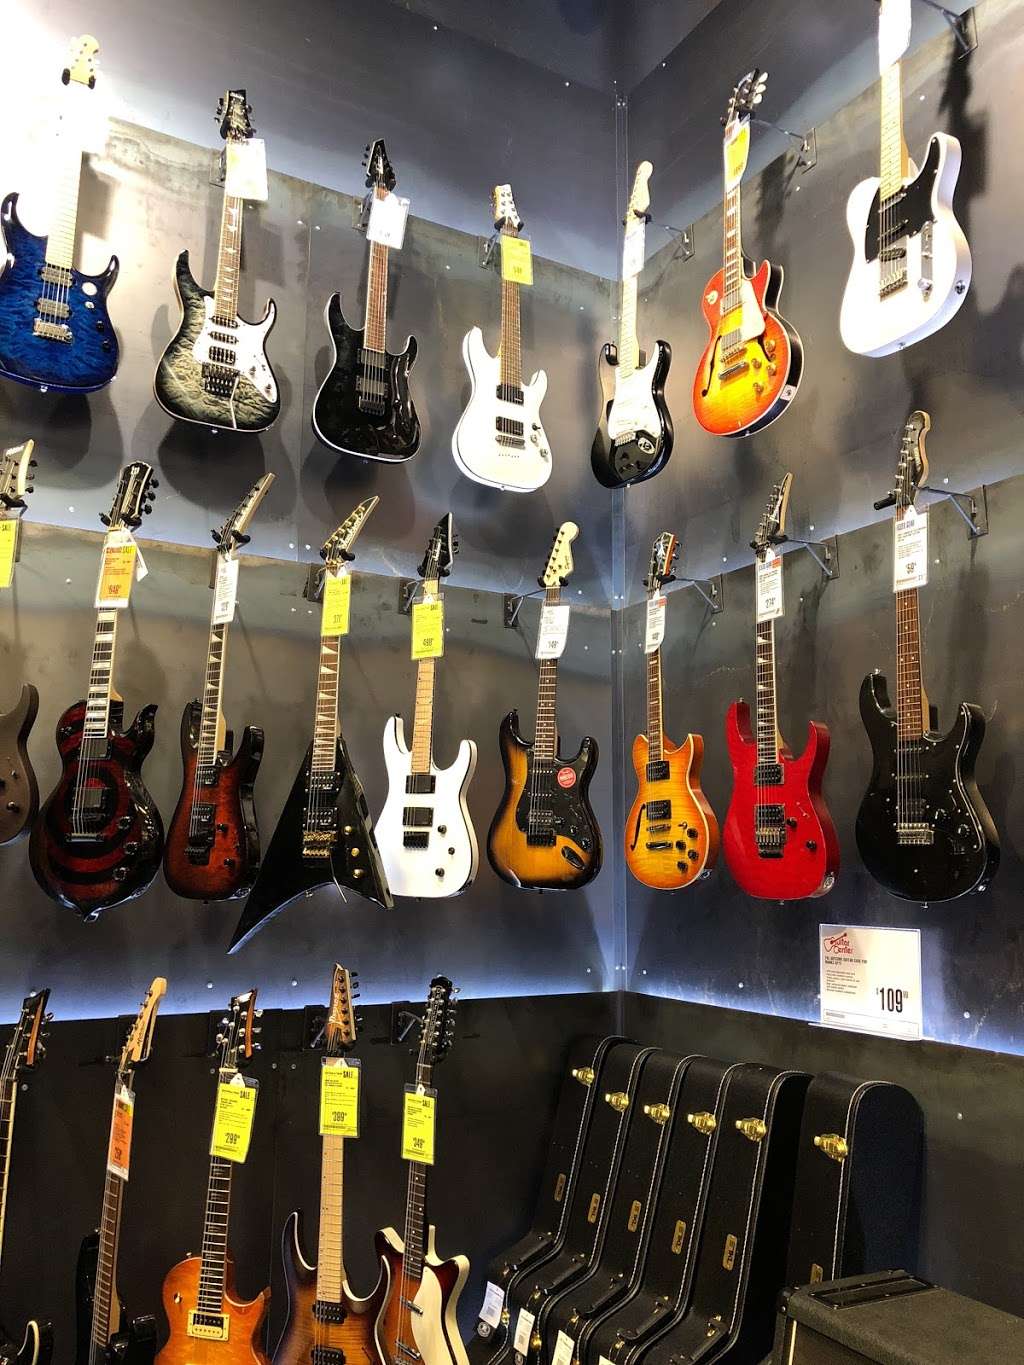 Guitar Center | 2550 Canyon Springs Pkwy Suite A, Riverside, CA 92507, USA | Phone: (951) 413-2951